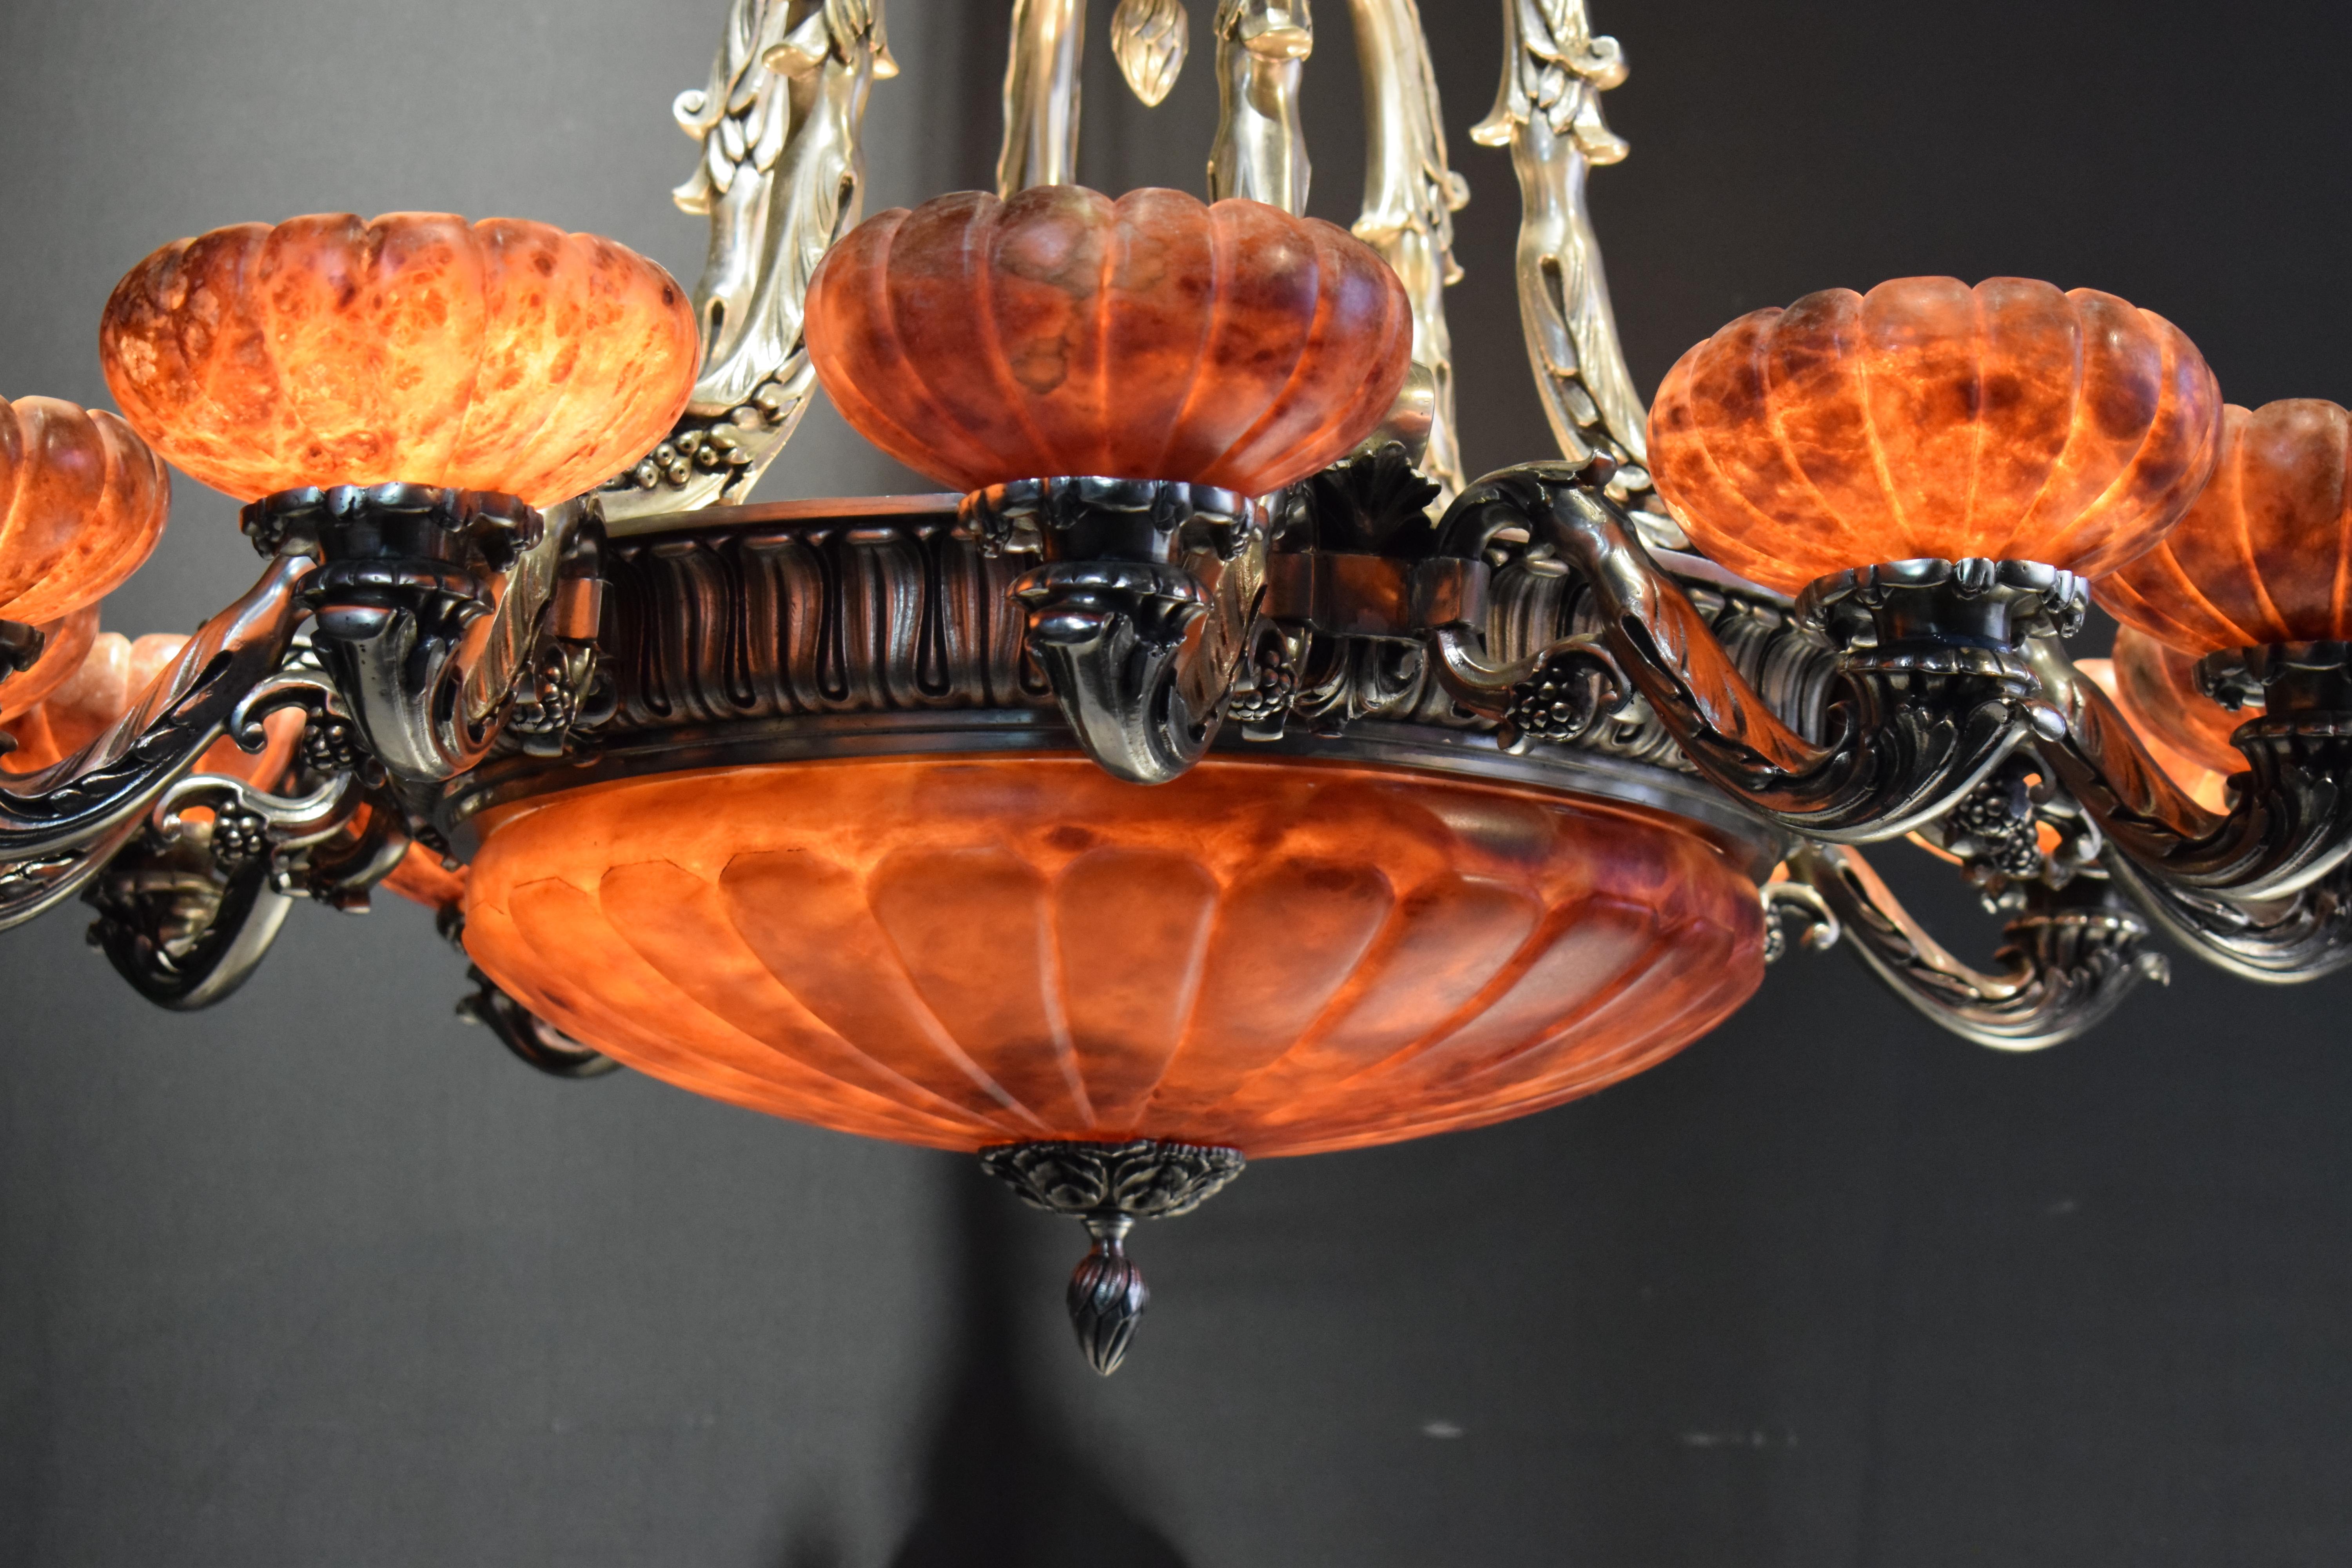 A Fine Gilt bronze chandelier in the Louis XVI taste, having guilloche patterned supports with floral garlands, a carved alabaster bowl issuing ten curving arms with scalloped alabaster shades, and five additional internal lights, apparently